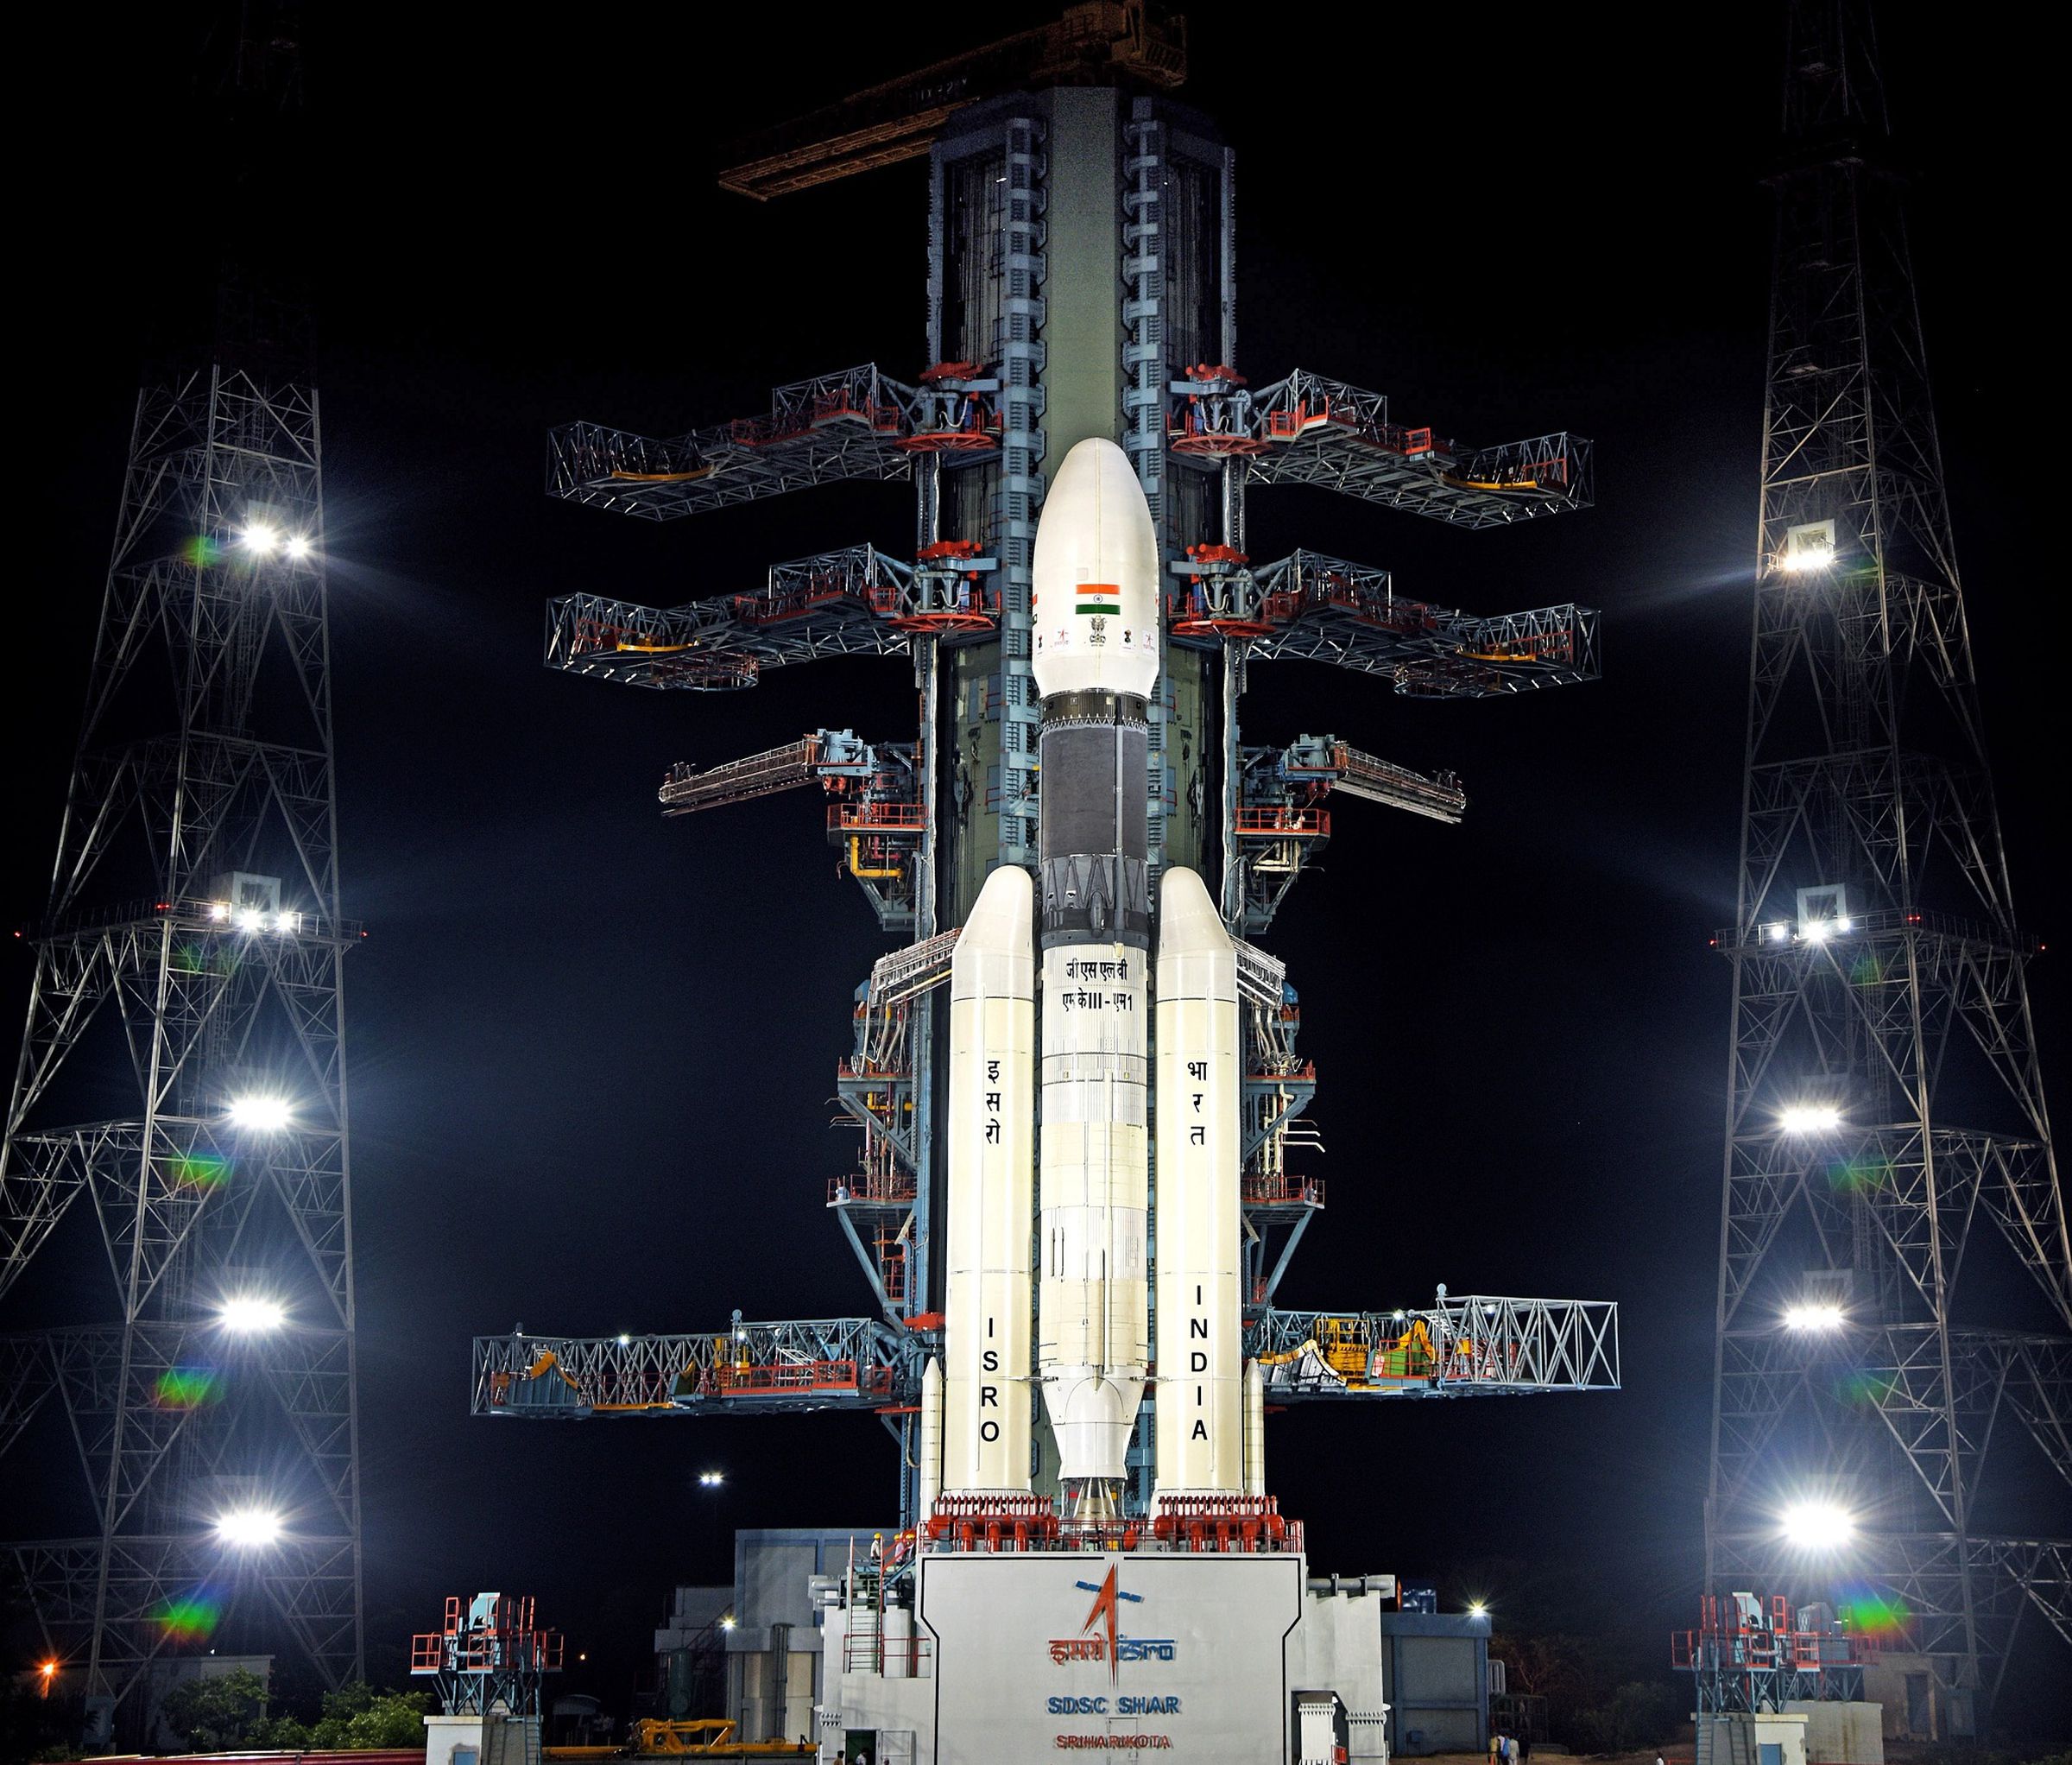 The Indian GSLV MK-III that took the Chandrayaan-2 vehicles into space